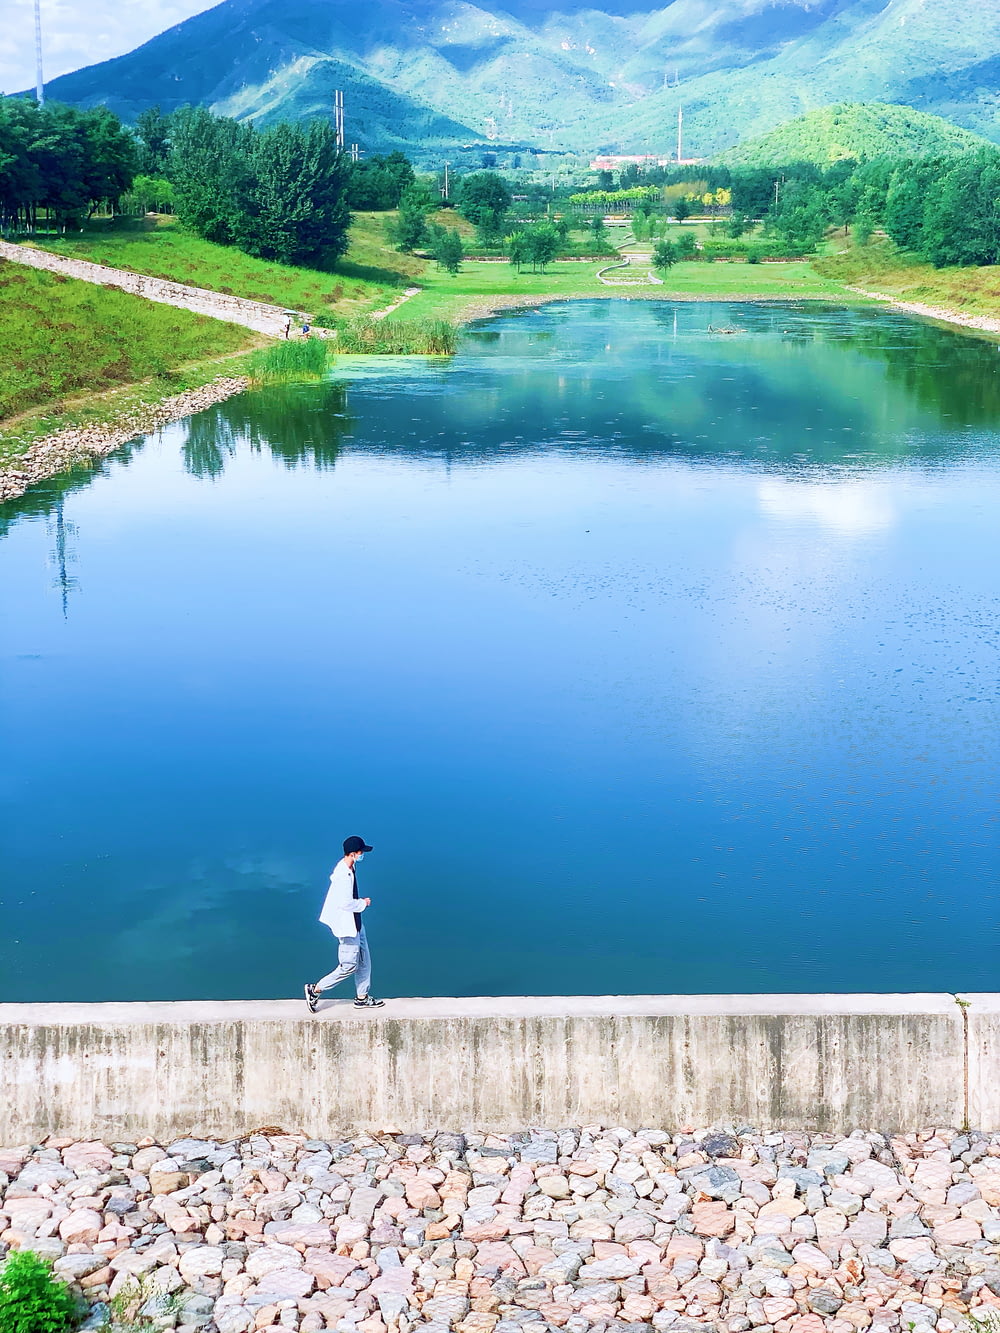 a person walking along a wall near a body of water